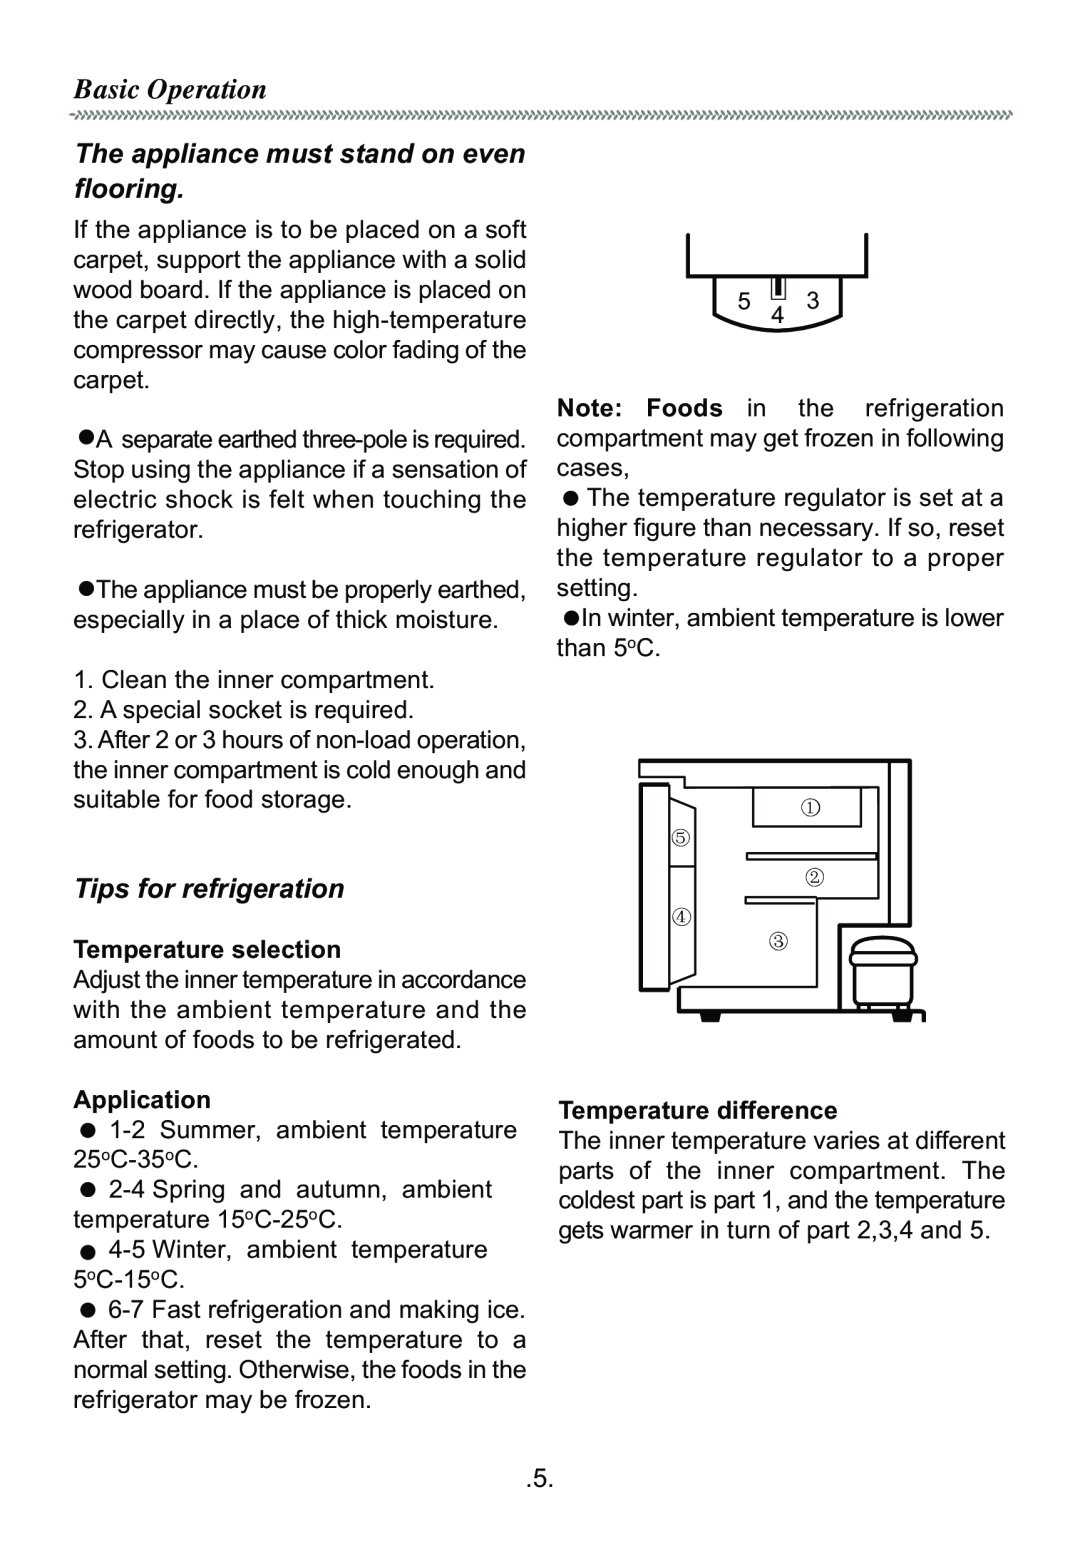 Haier HR-60 Basic Operation, The appliance must stand on even flooring, Tips for refrigeration, Temperature selection 